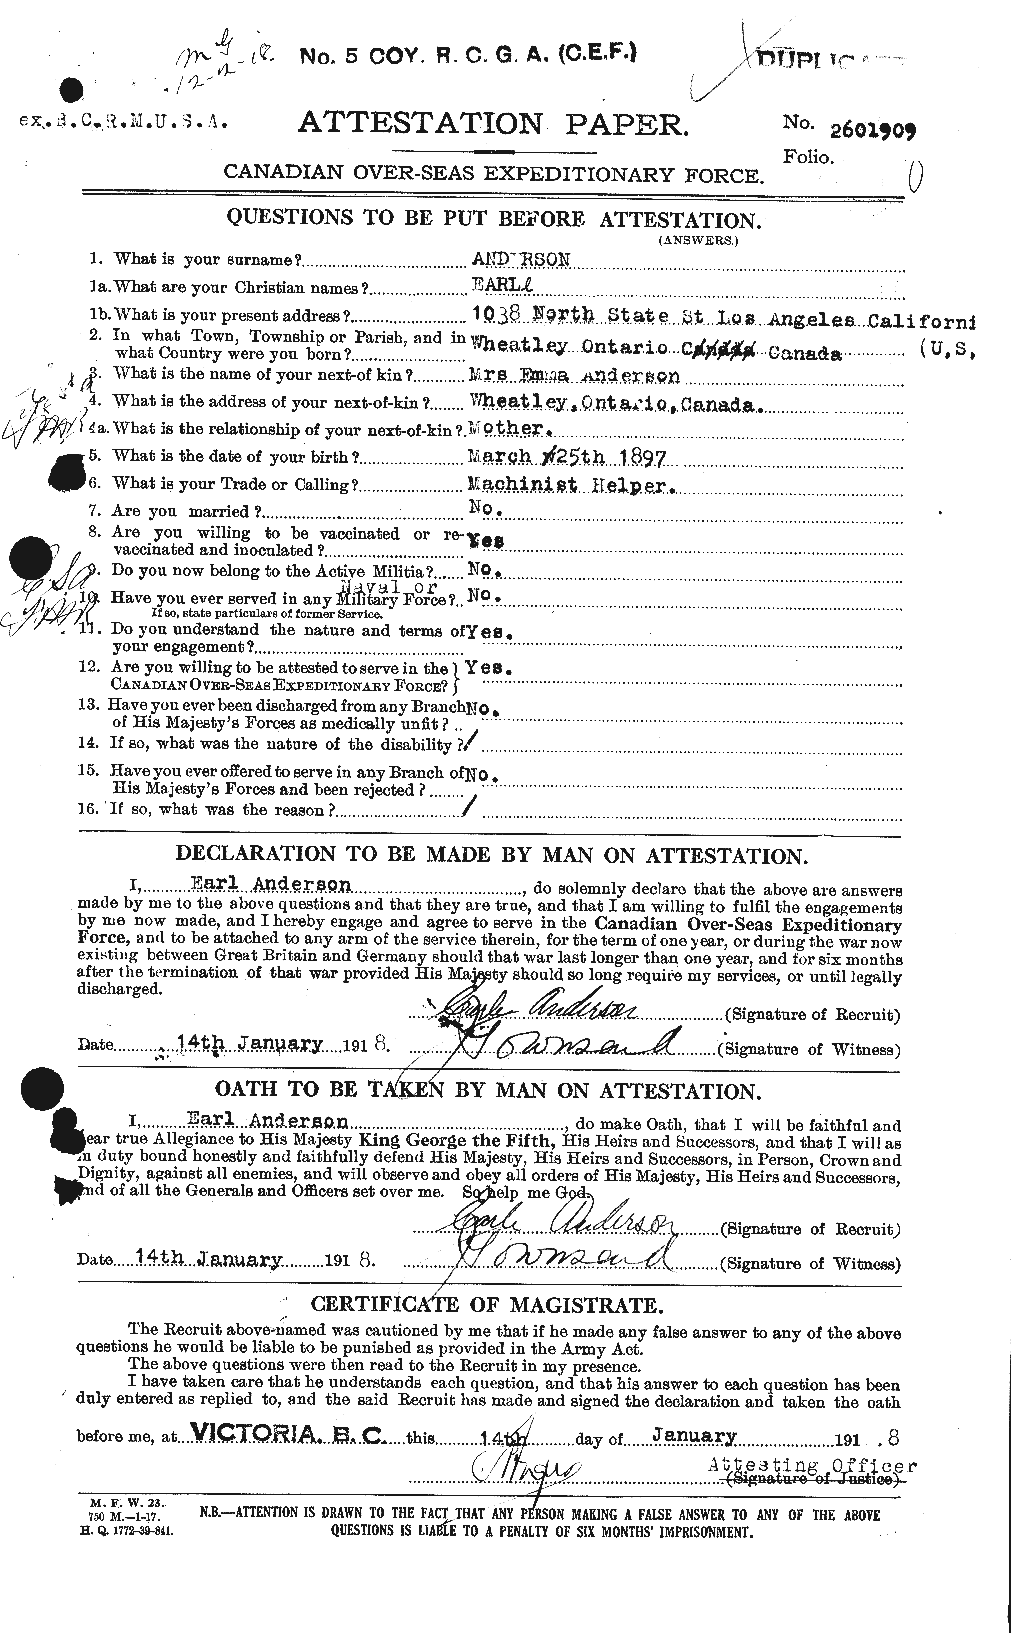 Personnel Records of the First World War - CEF 209963a